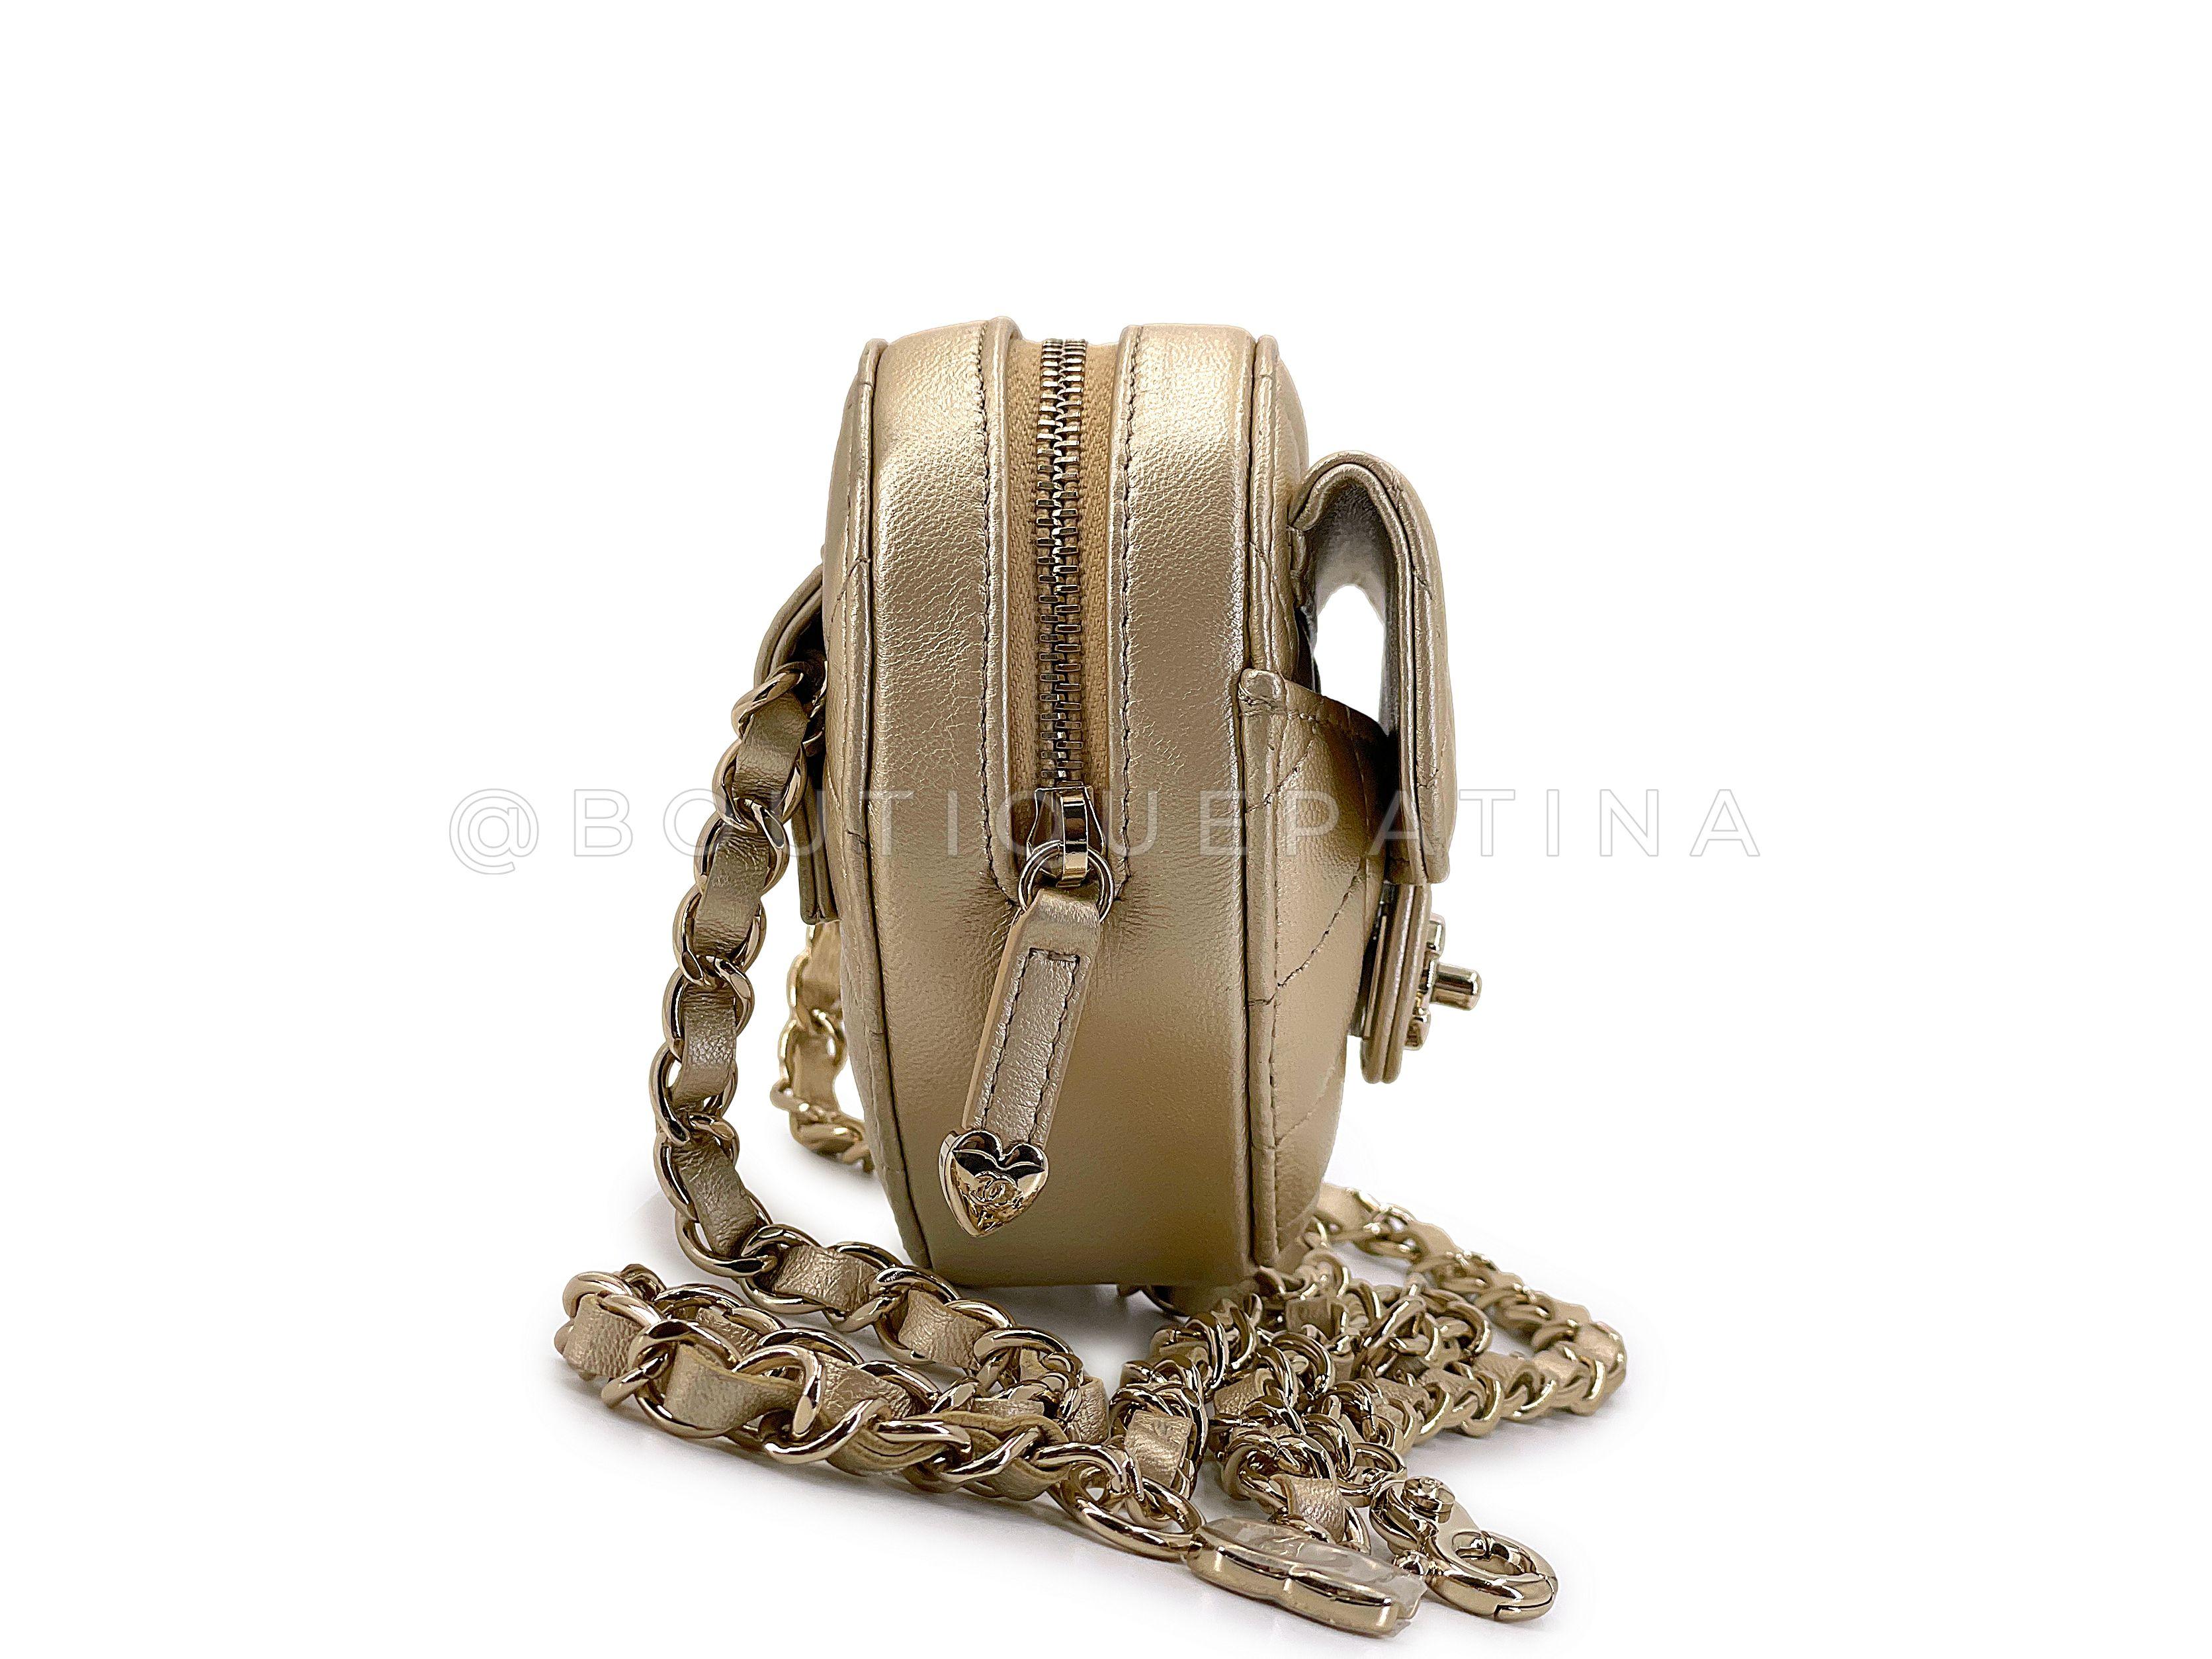 Pristine Chanel CC In Love Gold Heart Belt Bag GHW 67562 In Excellent Condition For Sale In Costa Mesa, CA